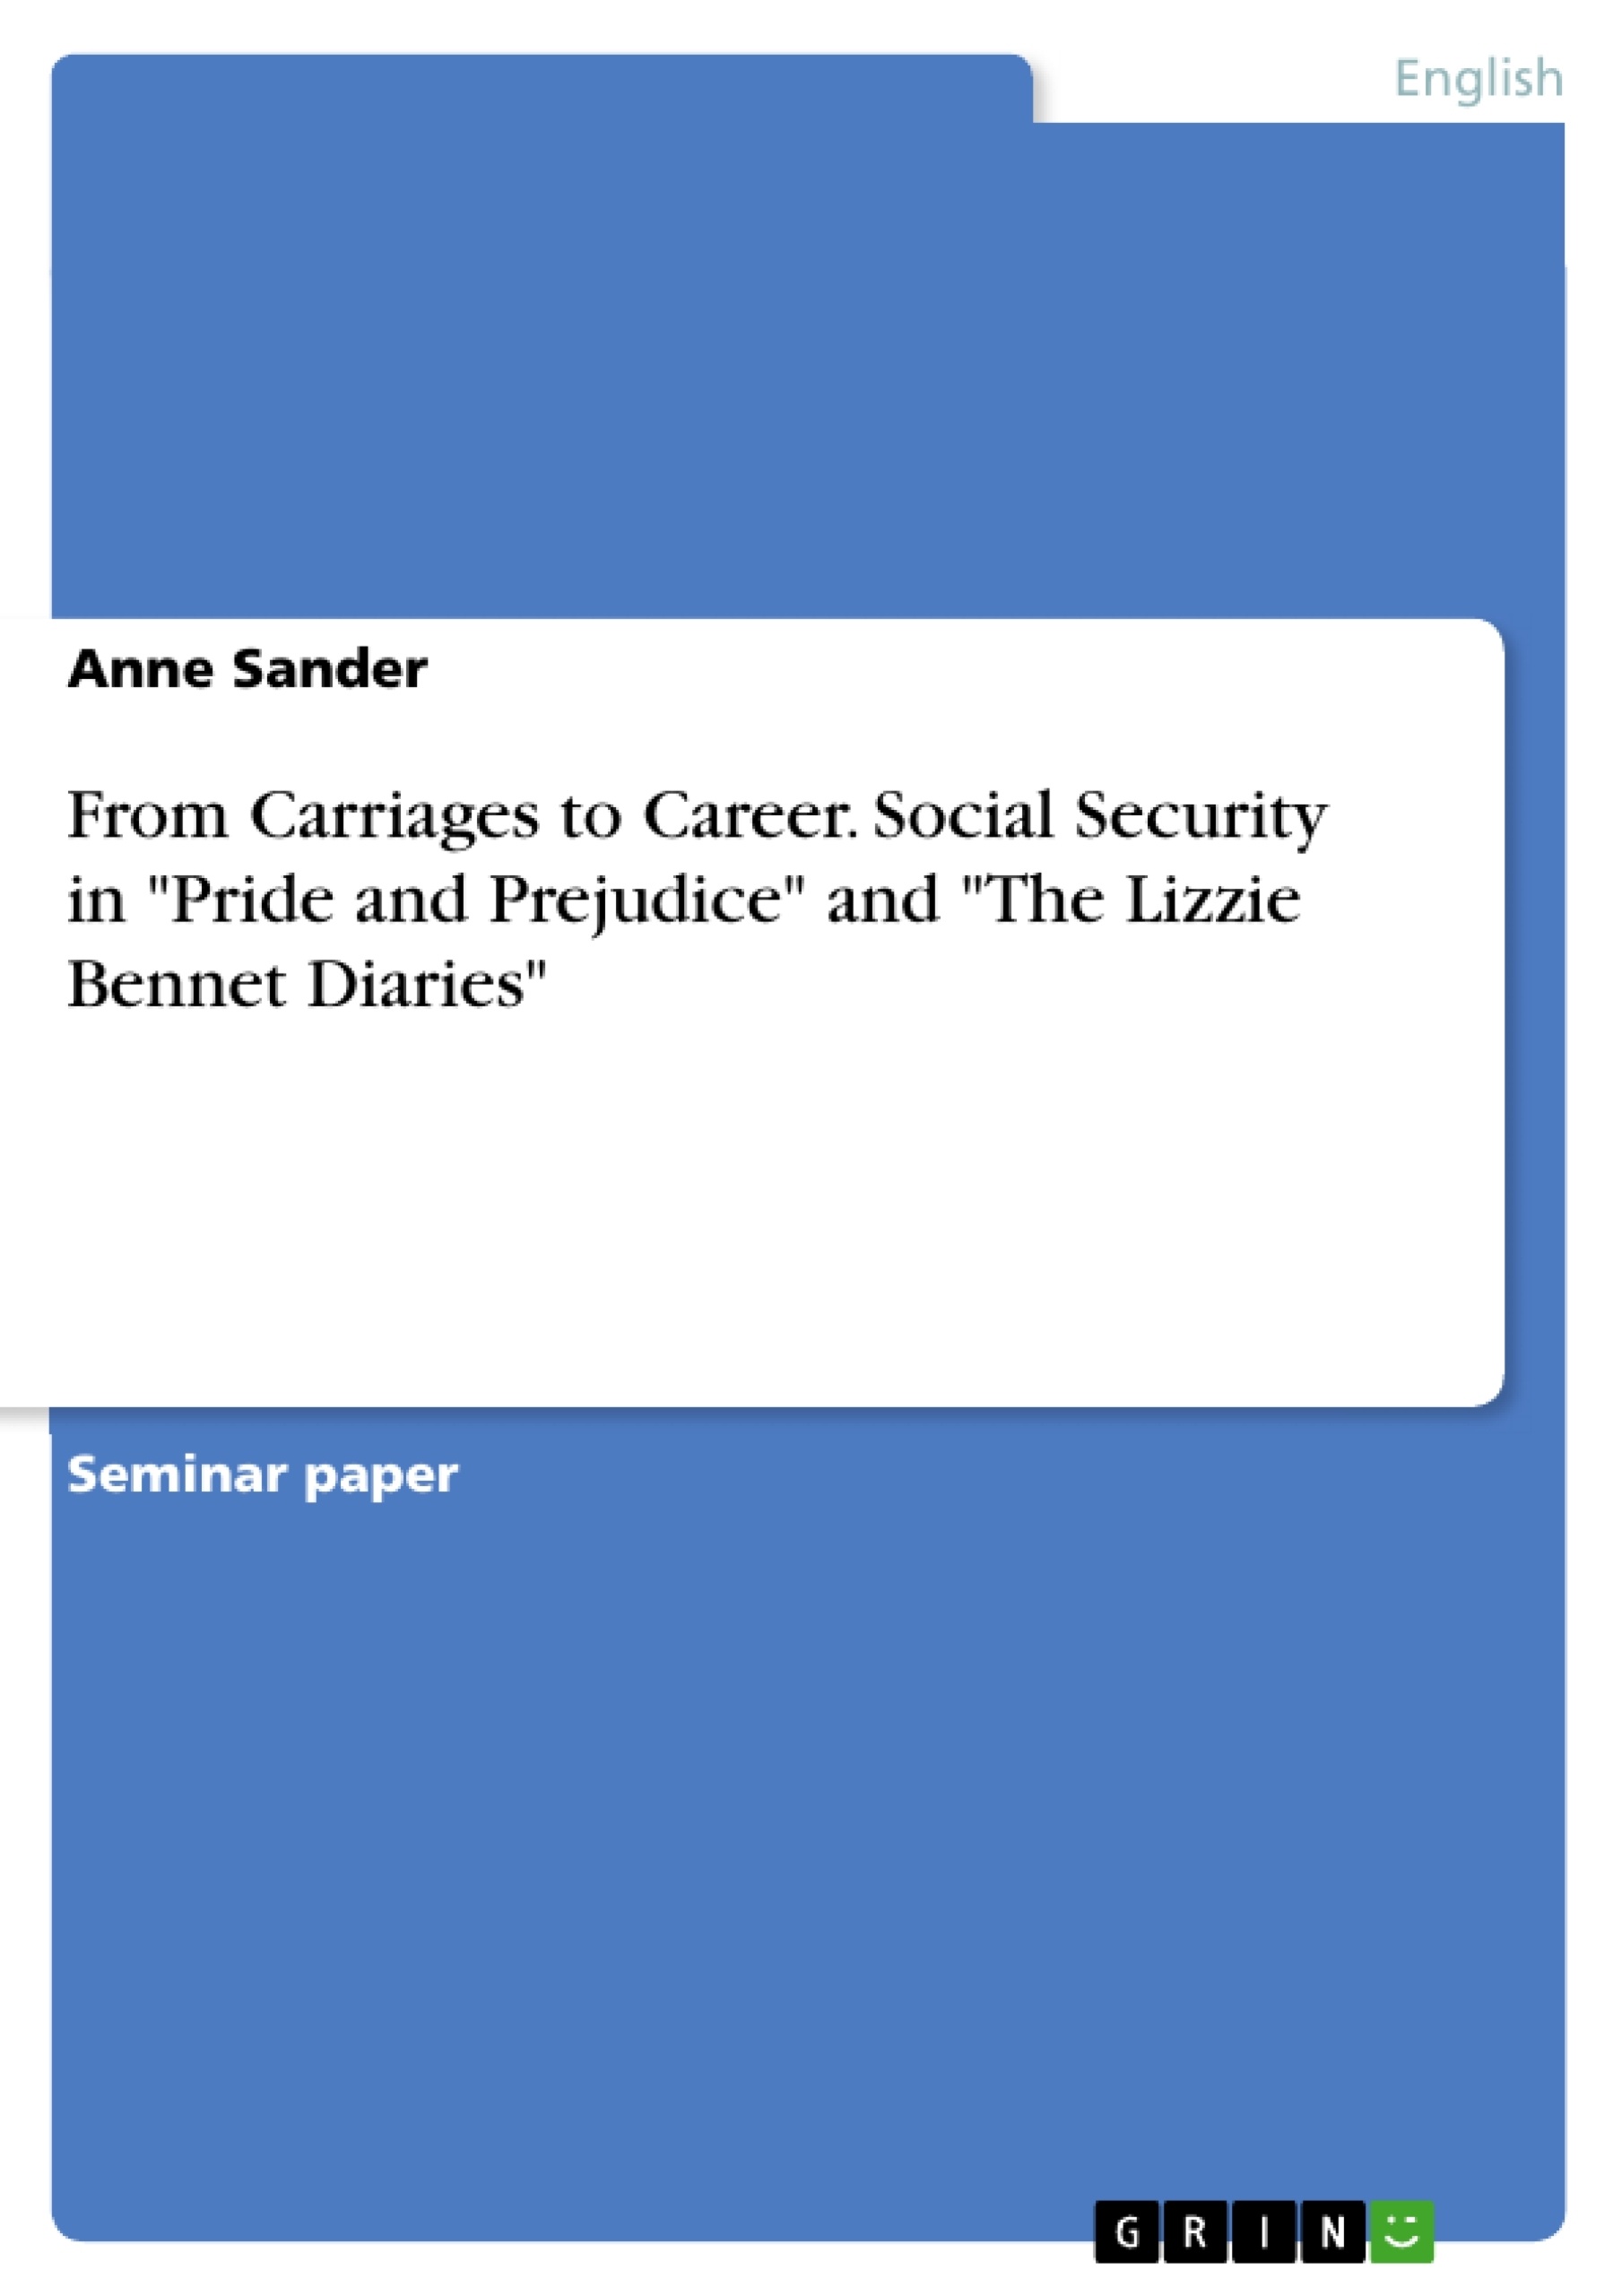 Title: From Carriages to Career. Social Security in "Pride and Prejudice" and "The Lizzie Bennet Diaries"